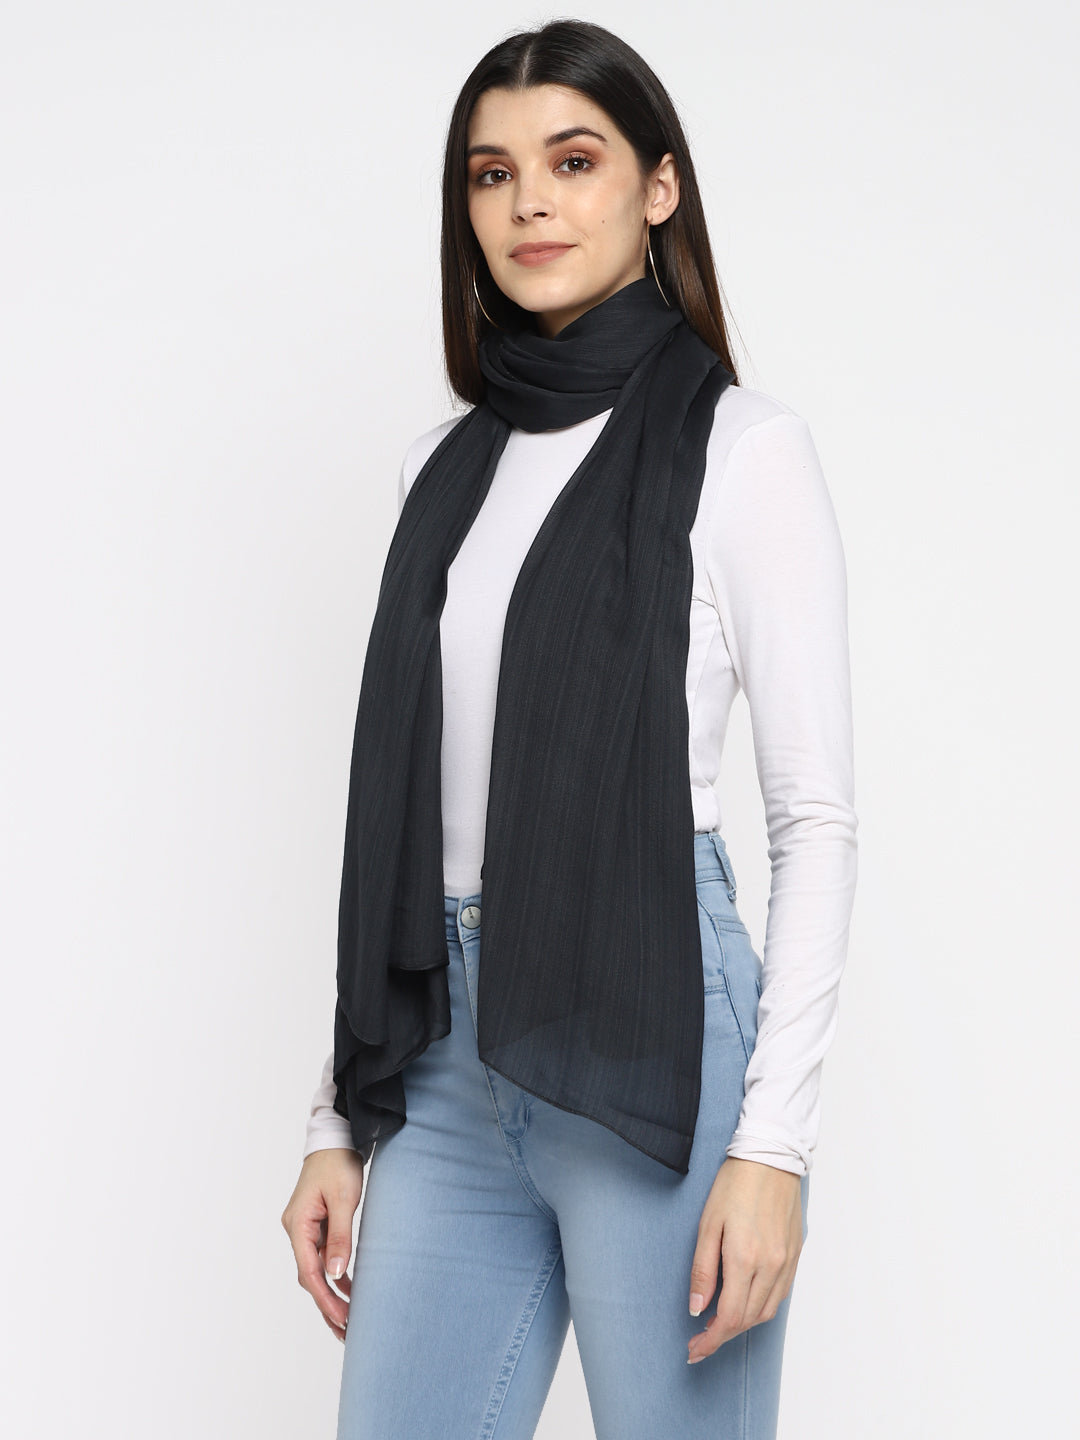 Charcoal Black Textured Stole